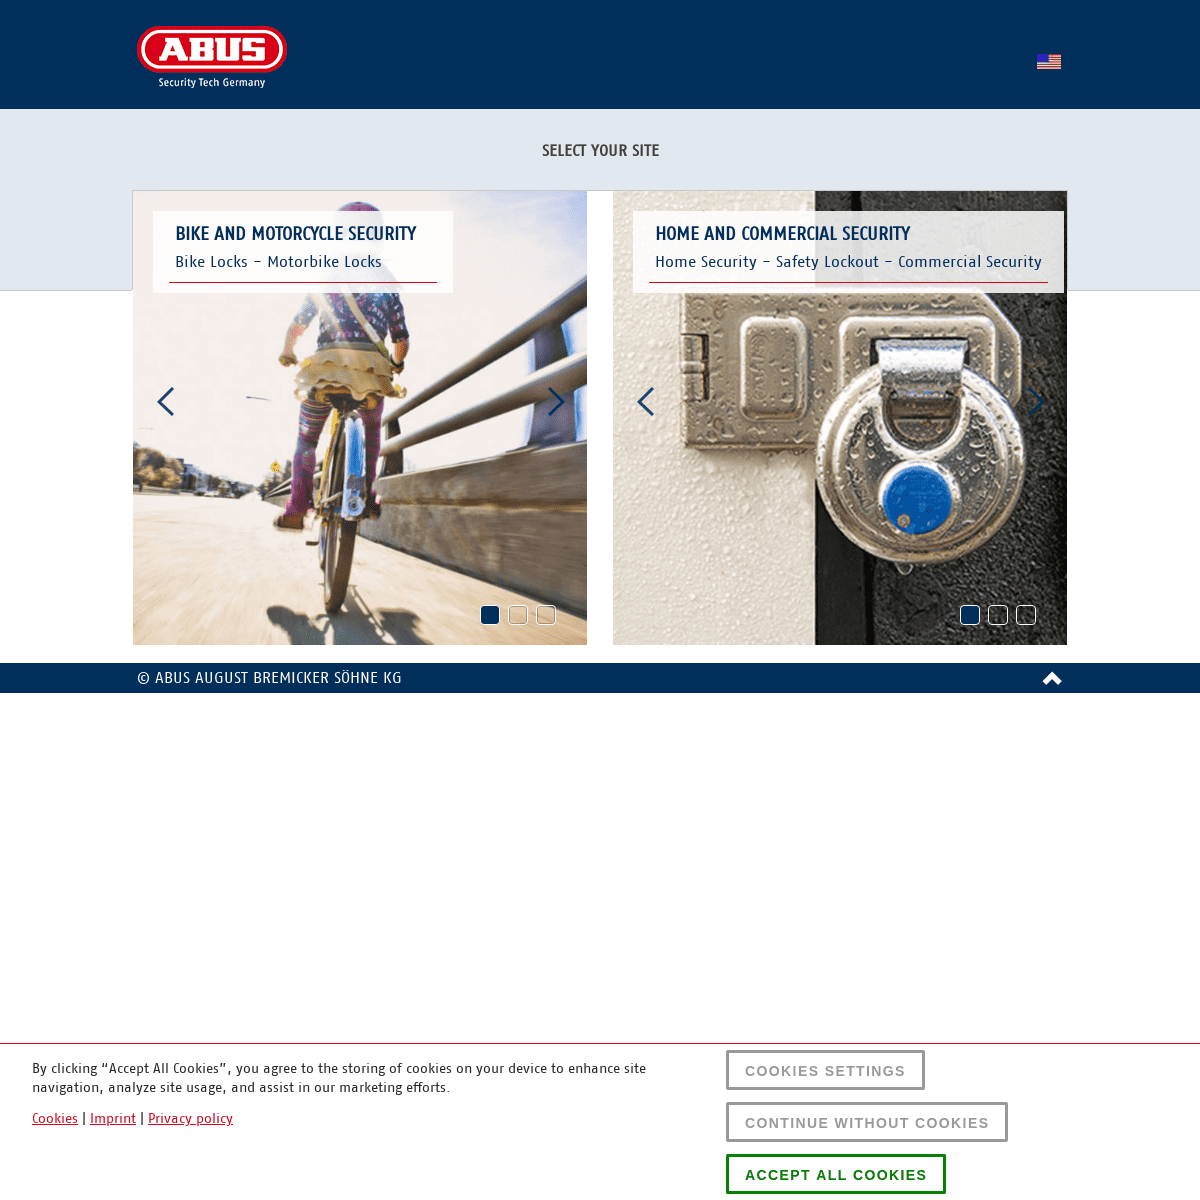 A complete backup of abus.com